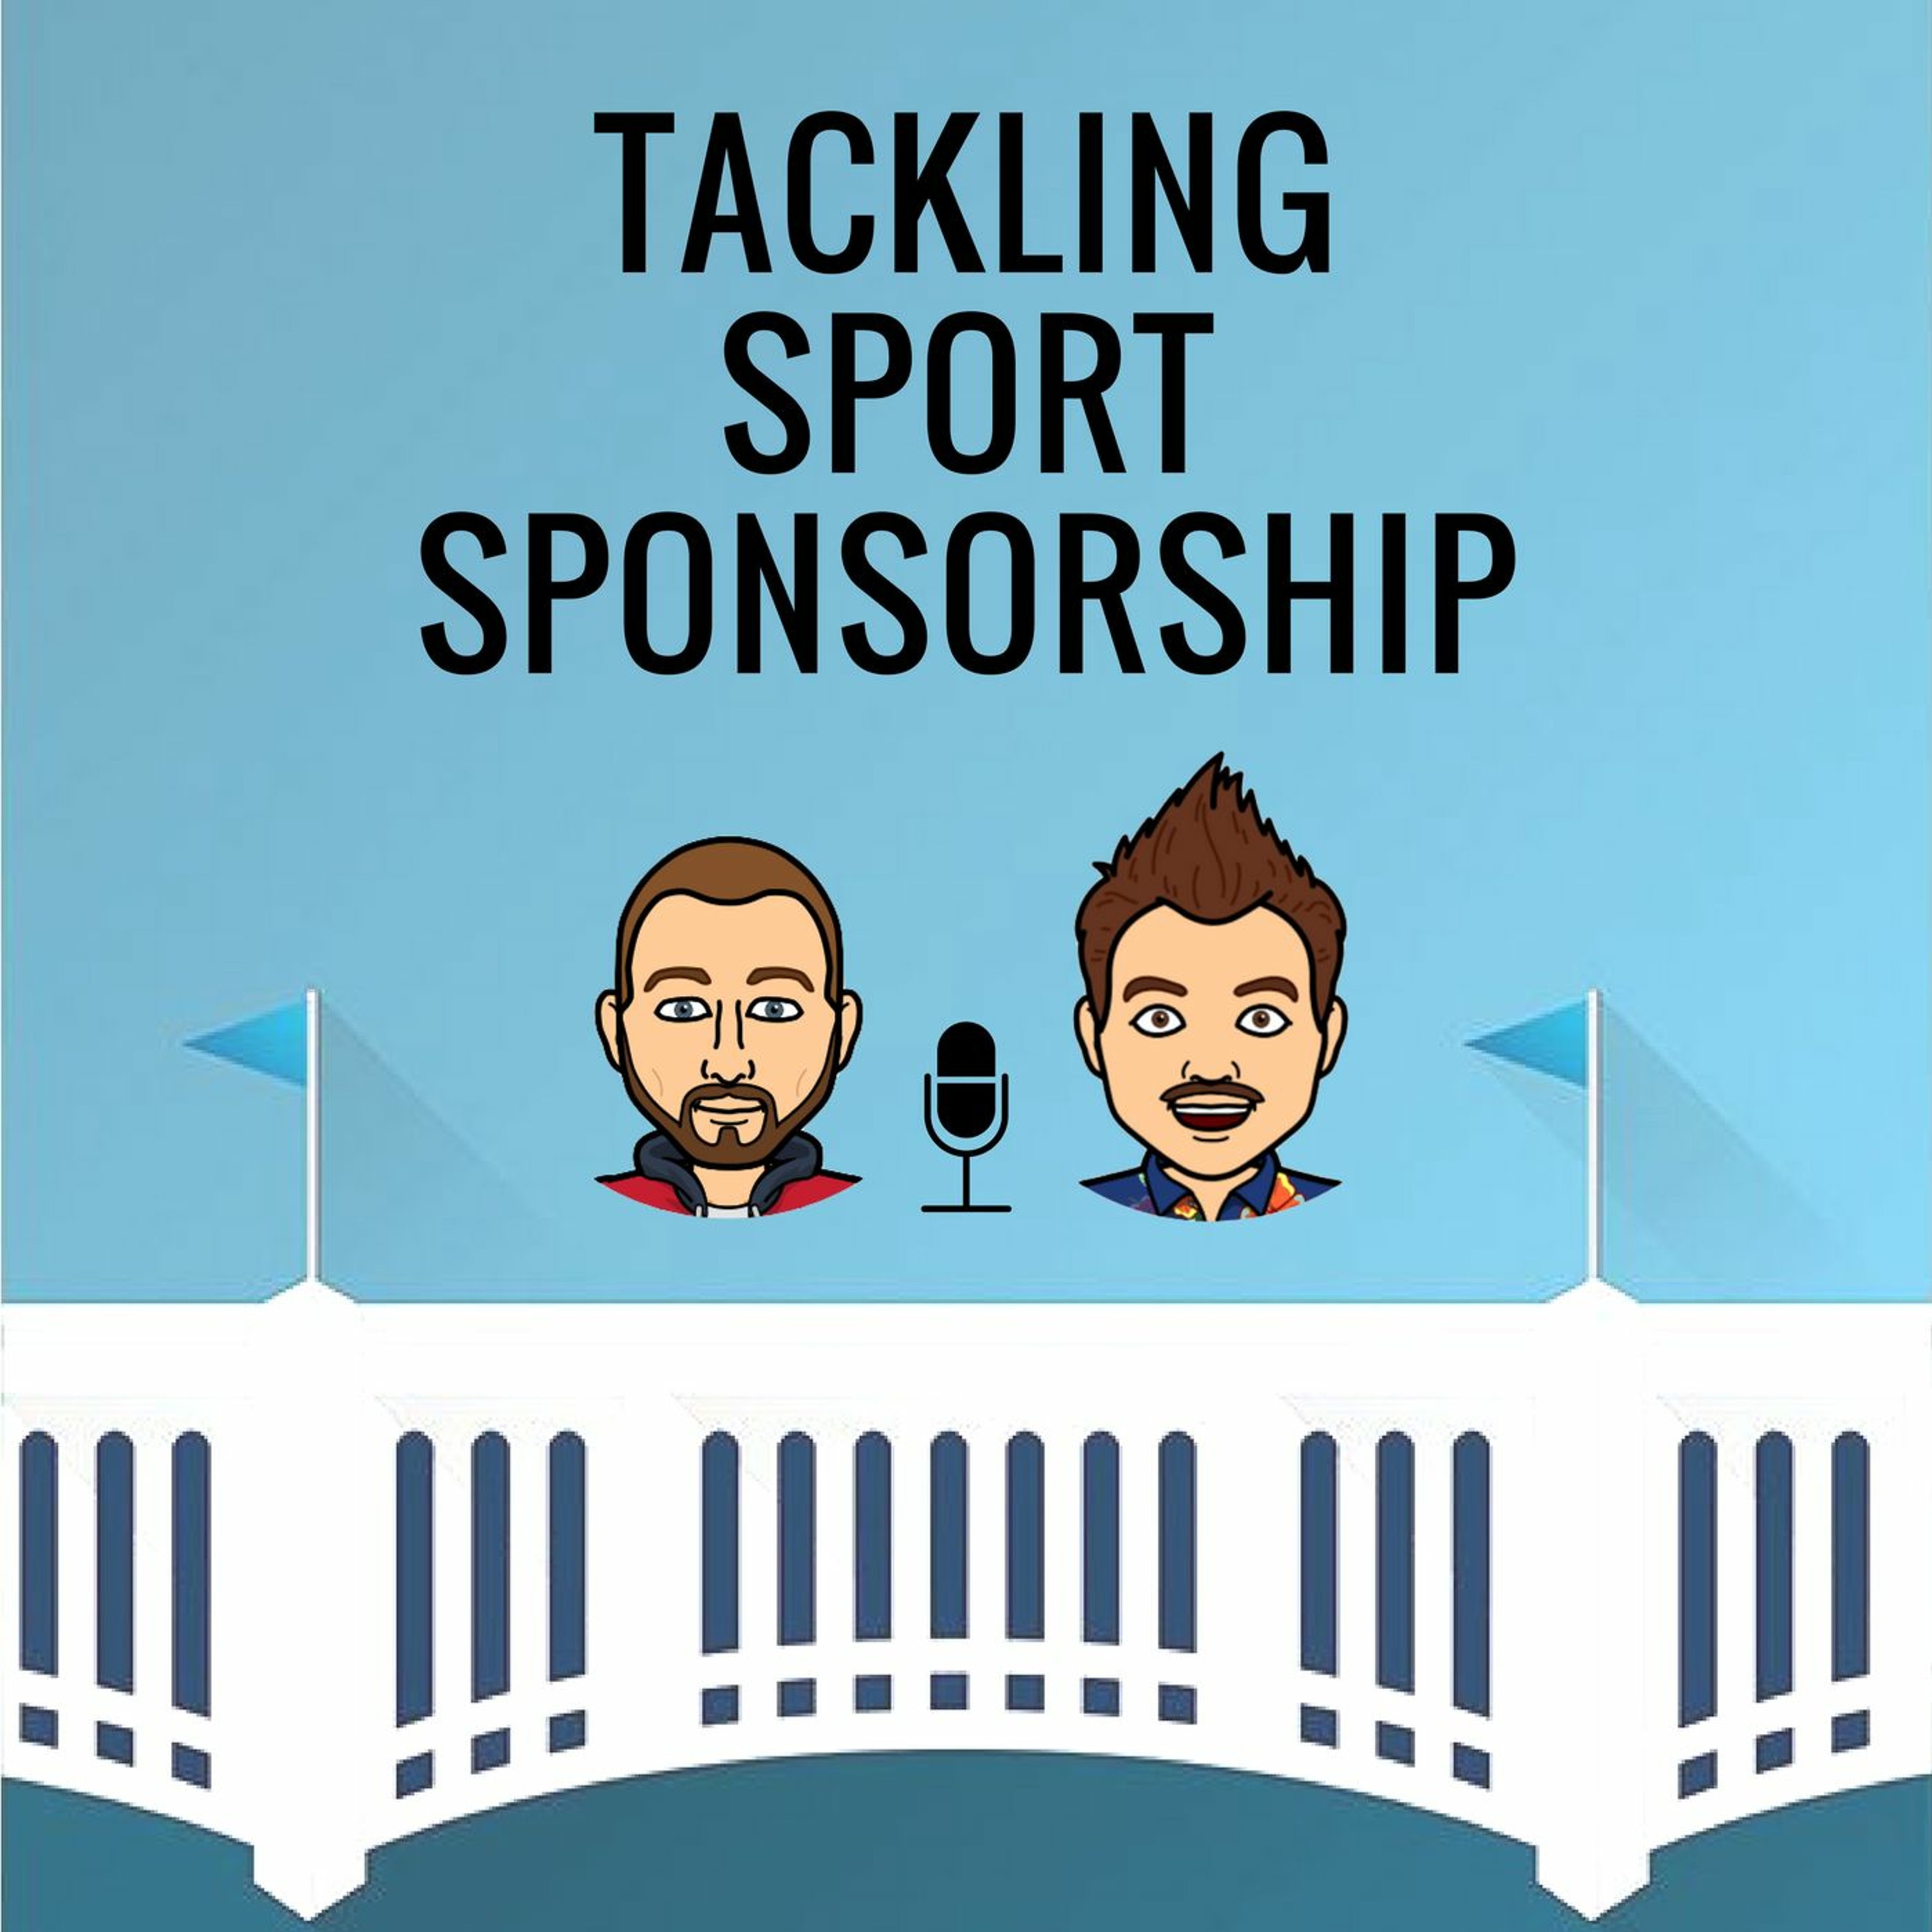 Tackling Sport Sponsorship #8: Our experience at CES 2018 (+Super Bowl)